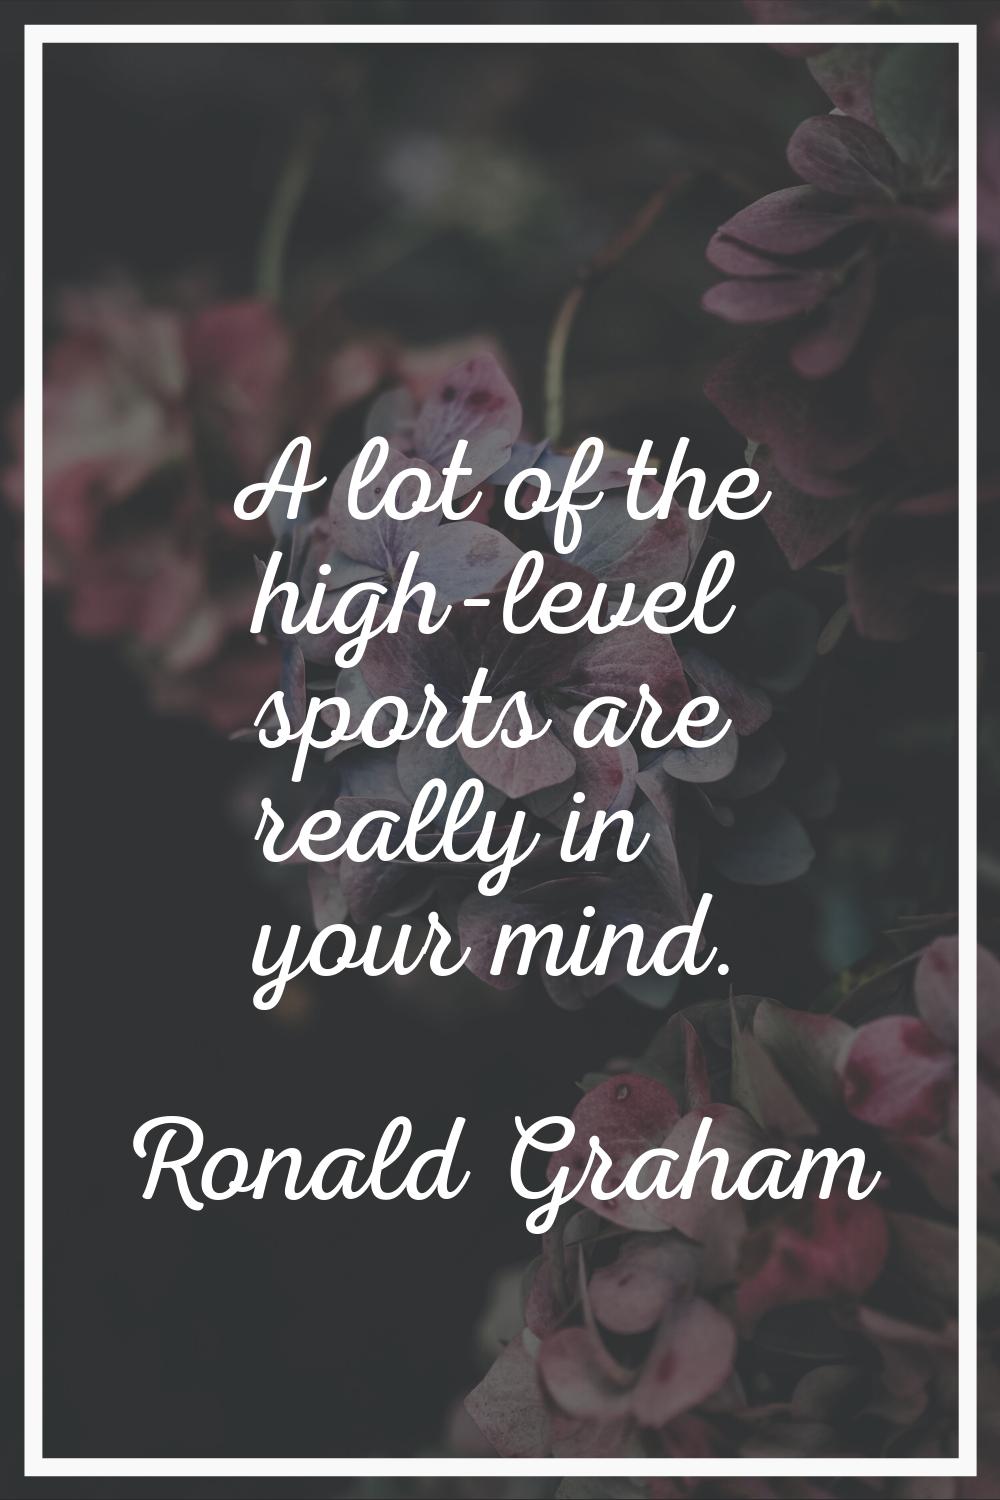 A lot of the high-level sports are really in your mind.